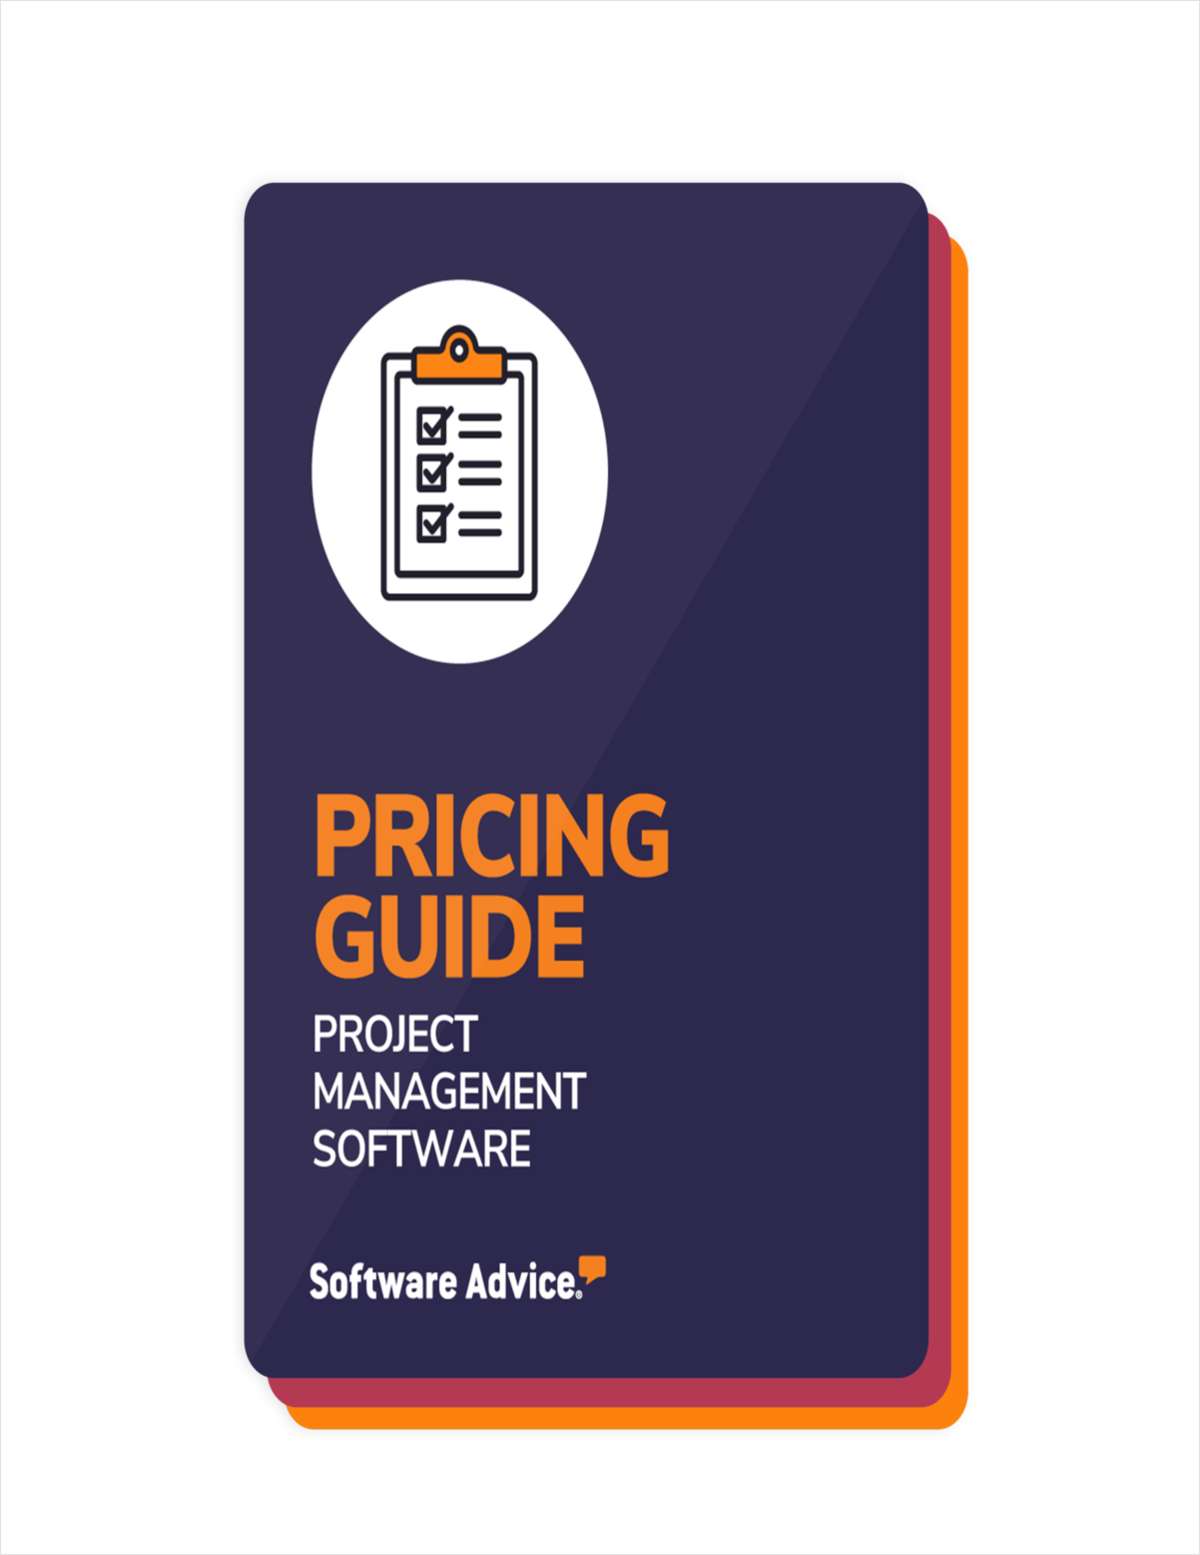 Don't Overpay: What to Know About Project Management Software Prices in 2022